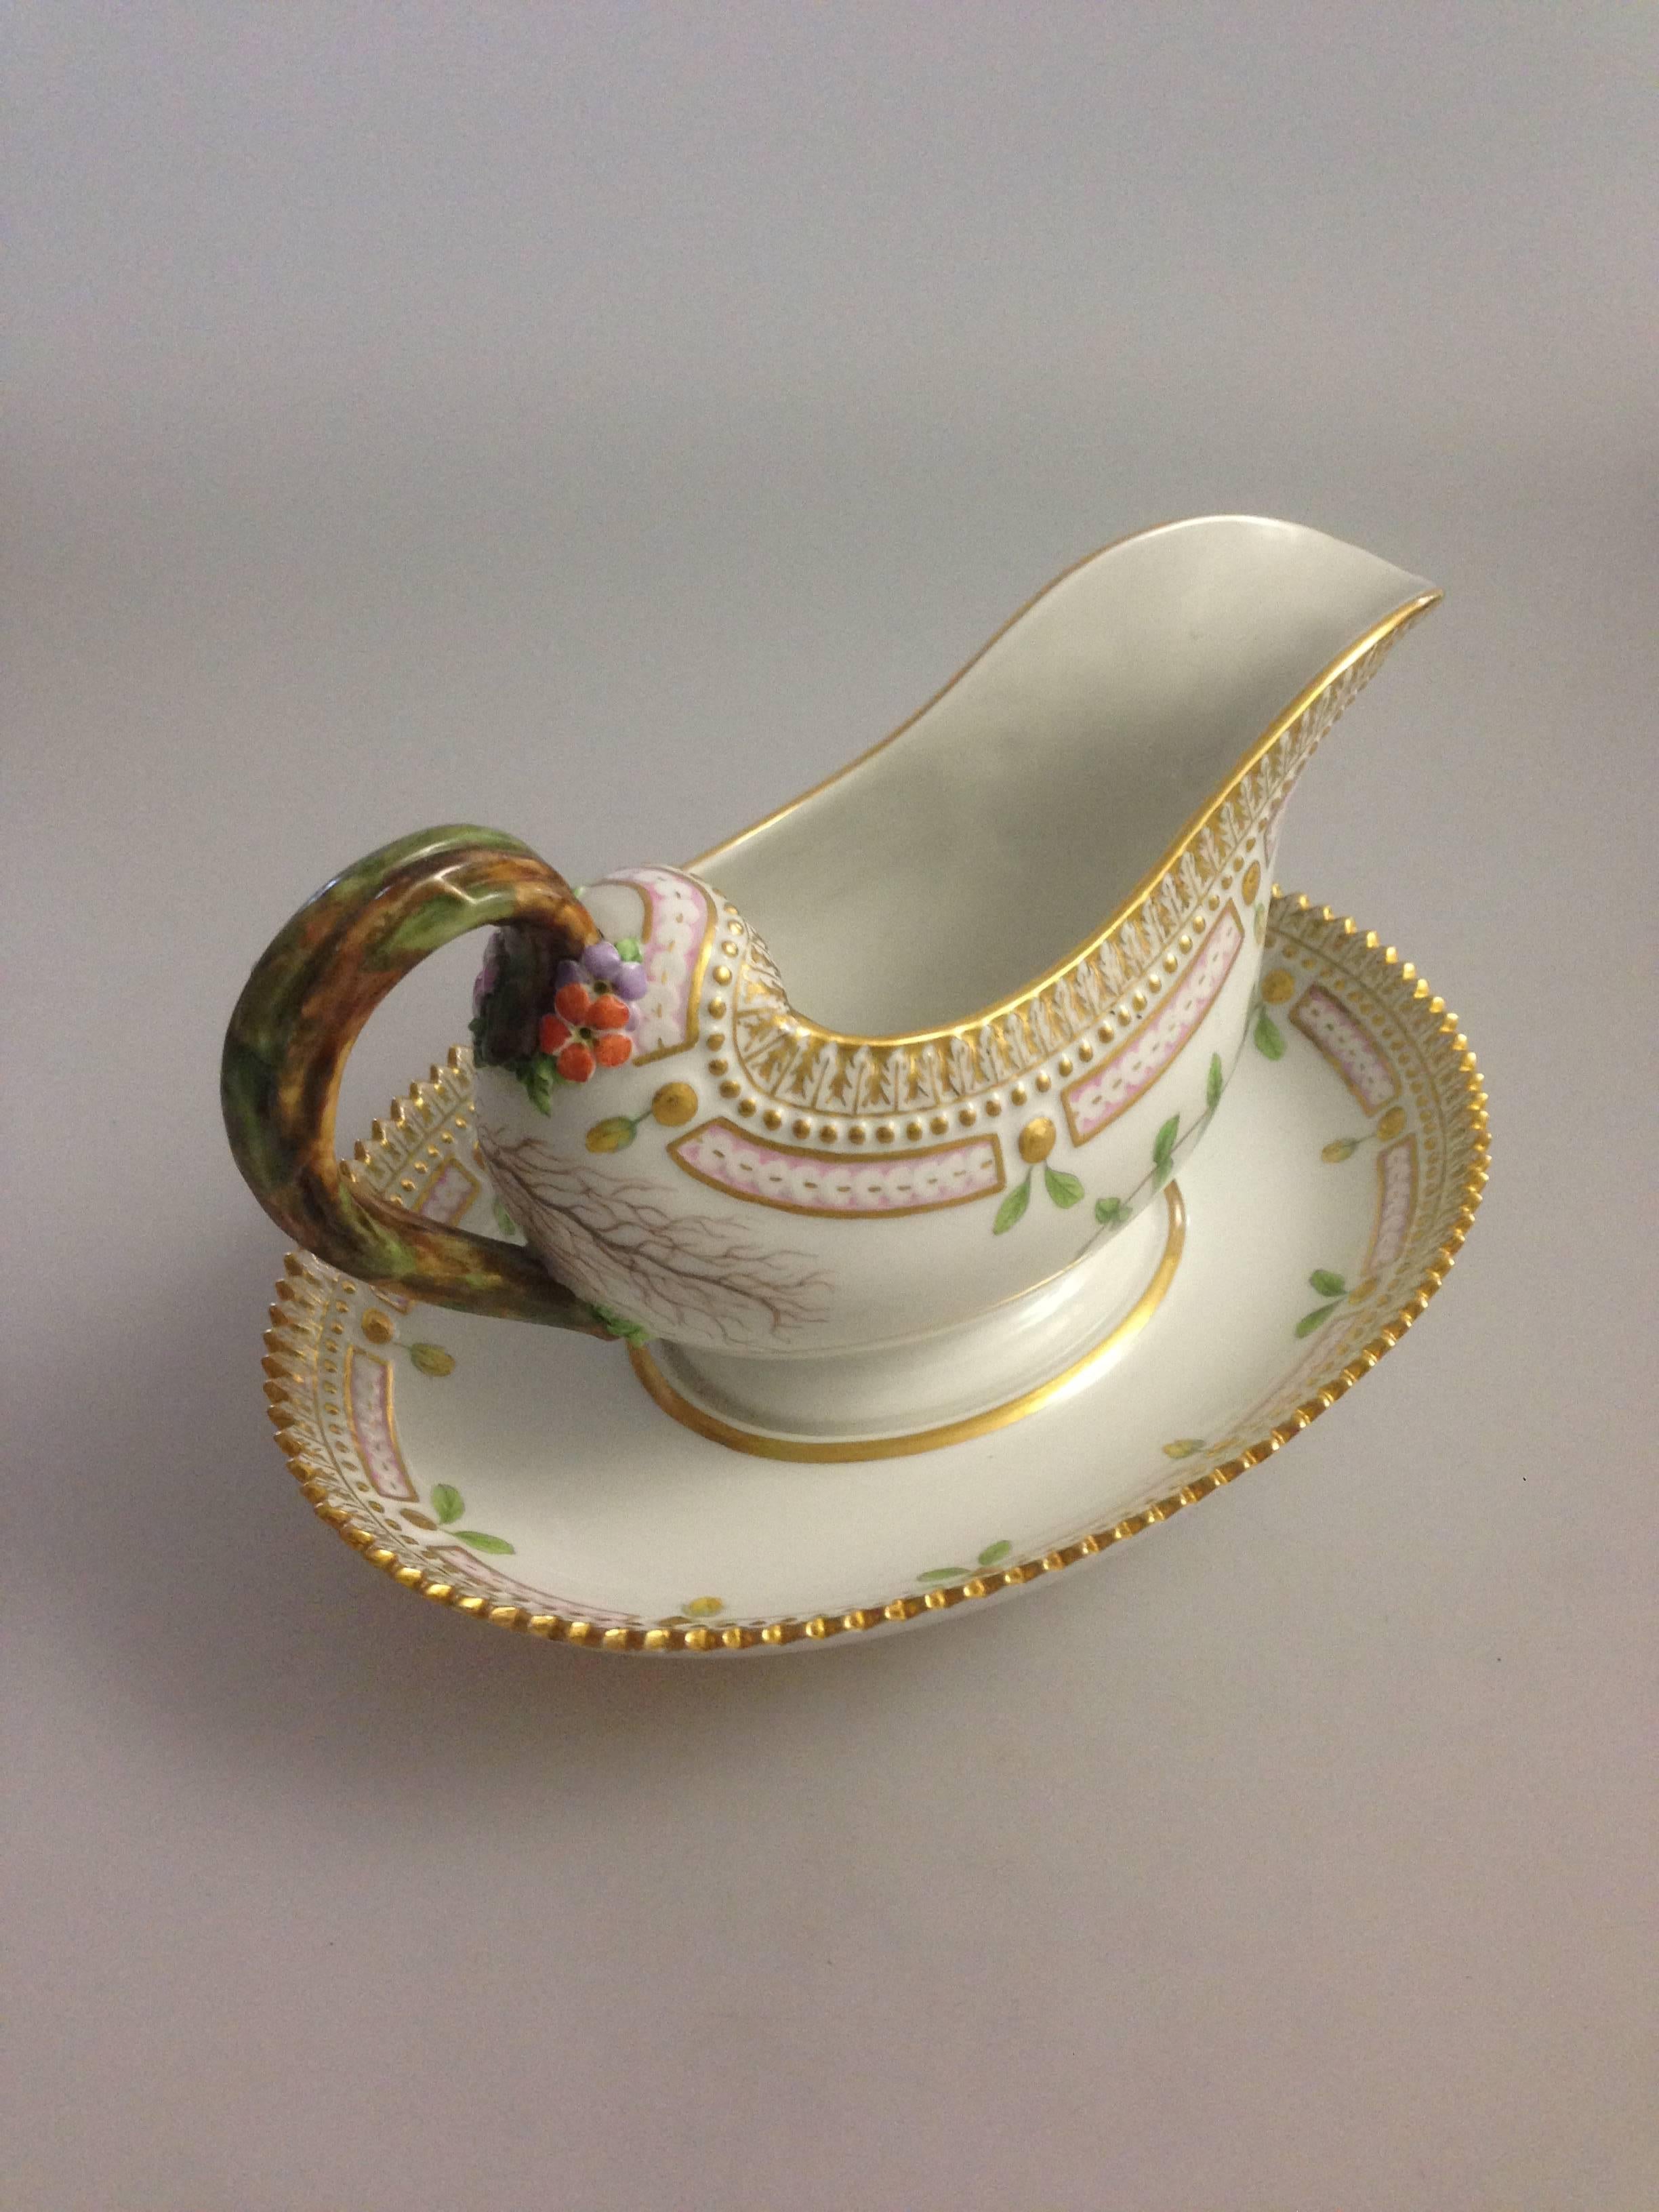 Hand-Painted Royal Copenhagen Flora Danica Gravy Boat with Attached Underplate